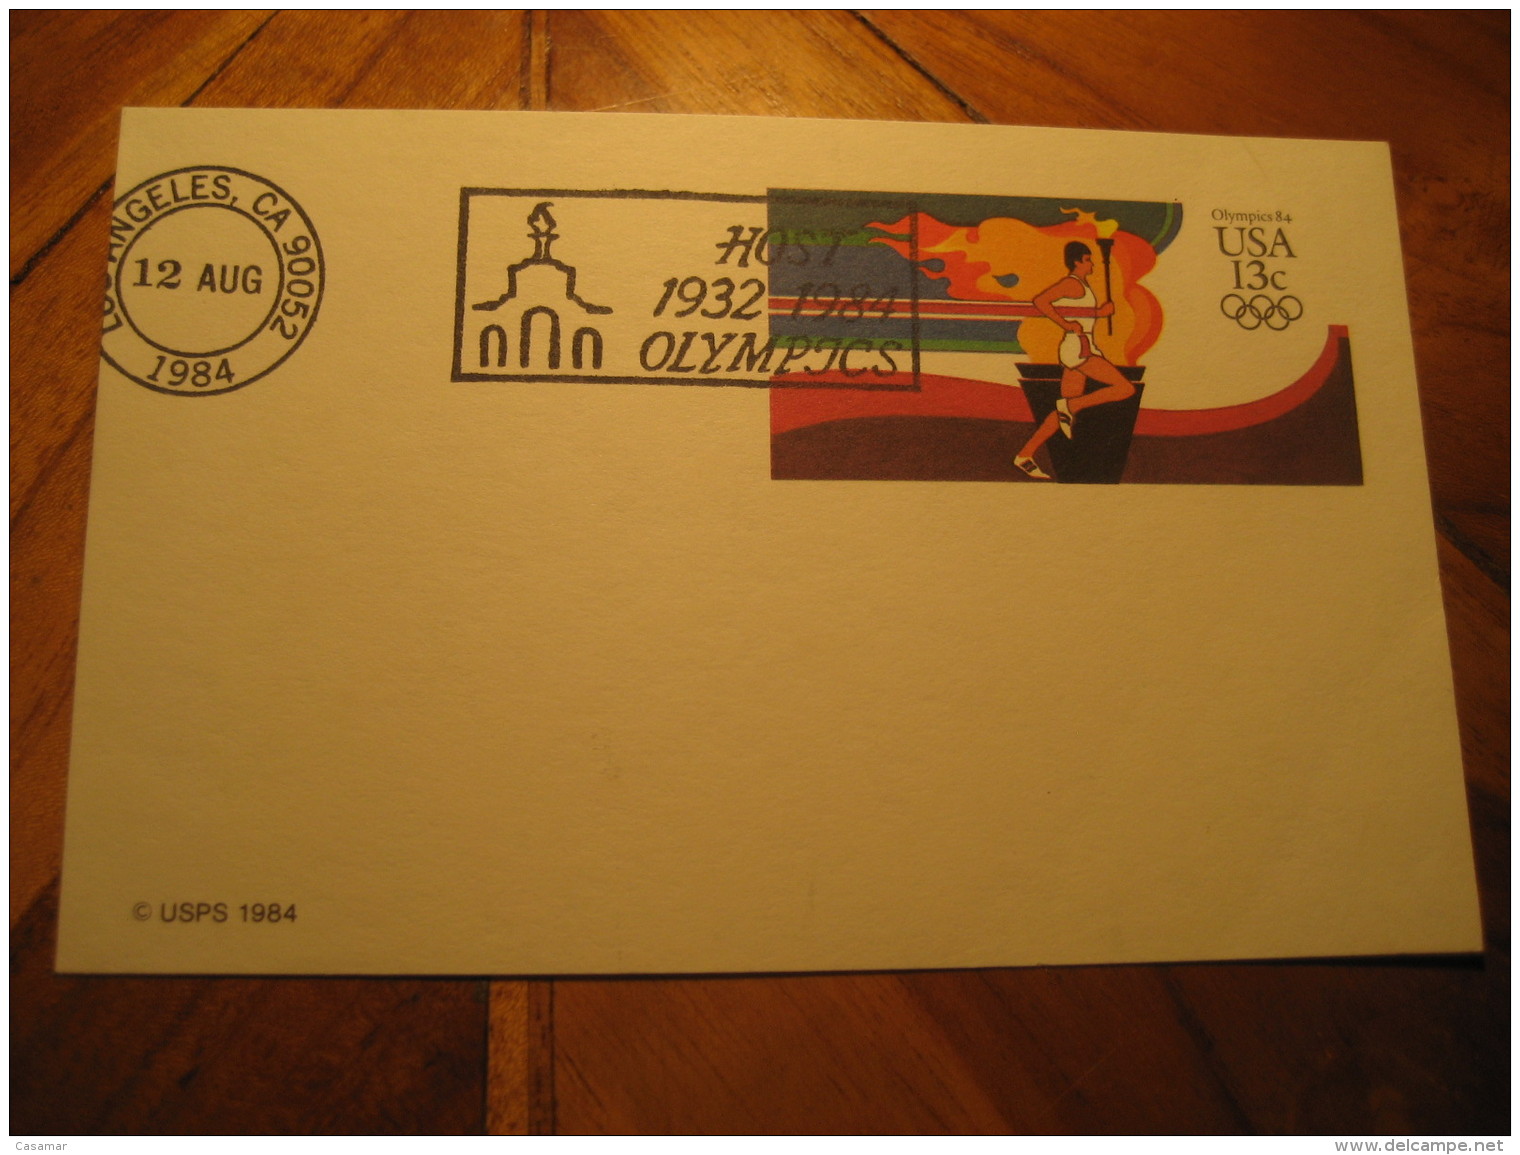 LOS ANGELES 1932 Olympic Games Olympics 1984 Torch Postal Stationery Card USA - Sommer 1932: Los Angeles